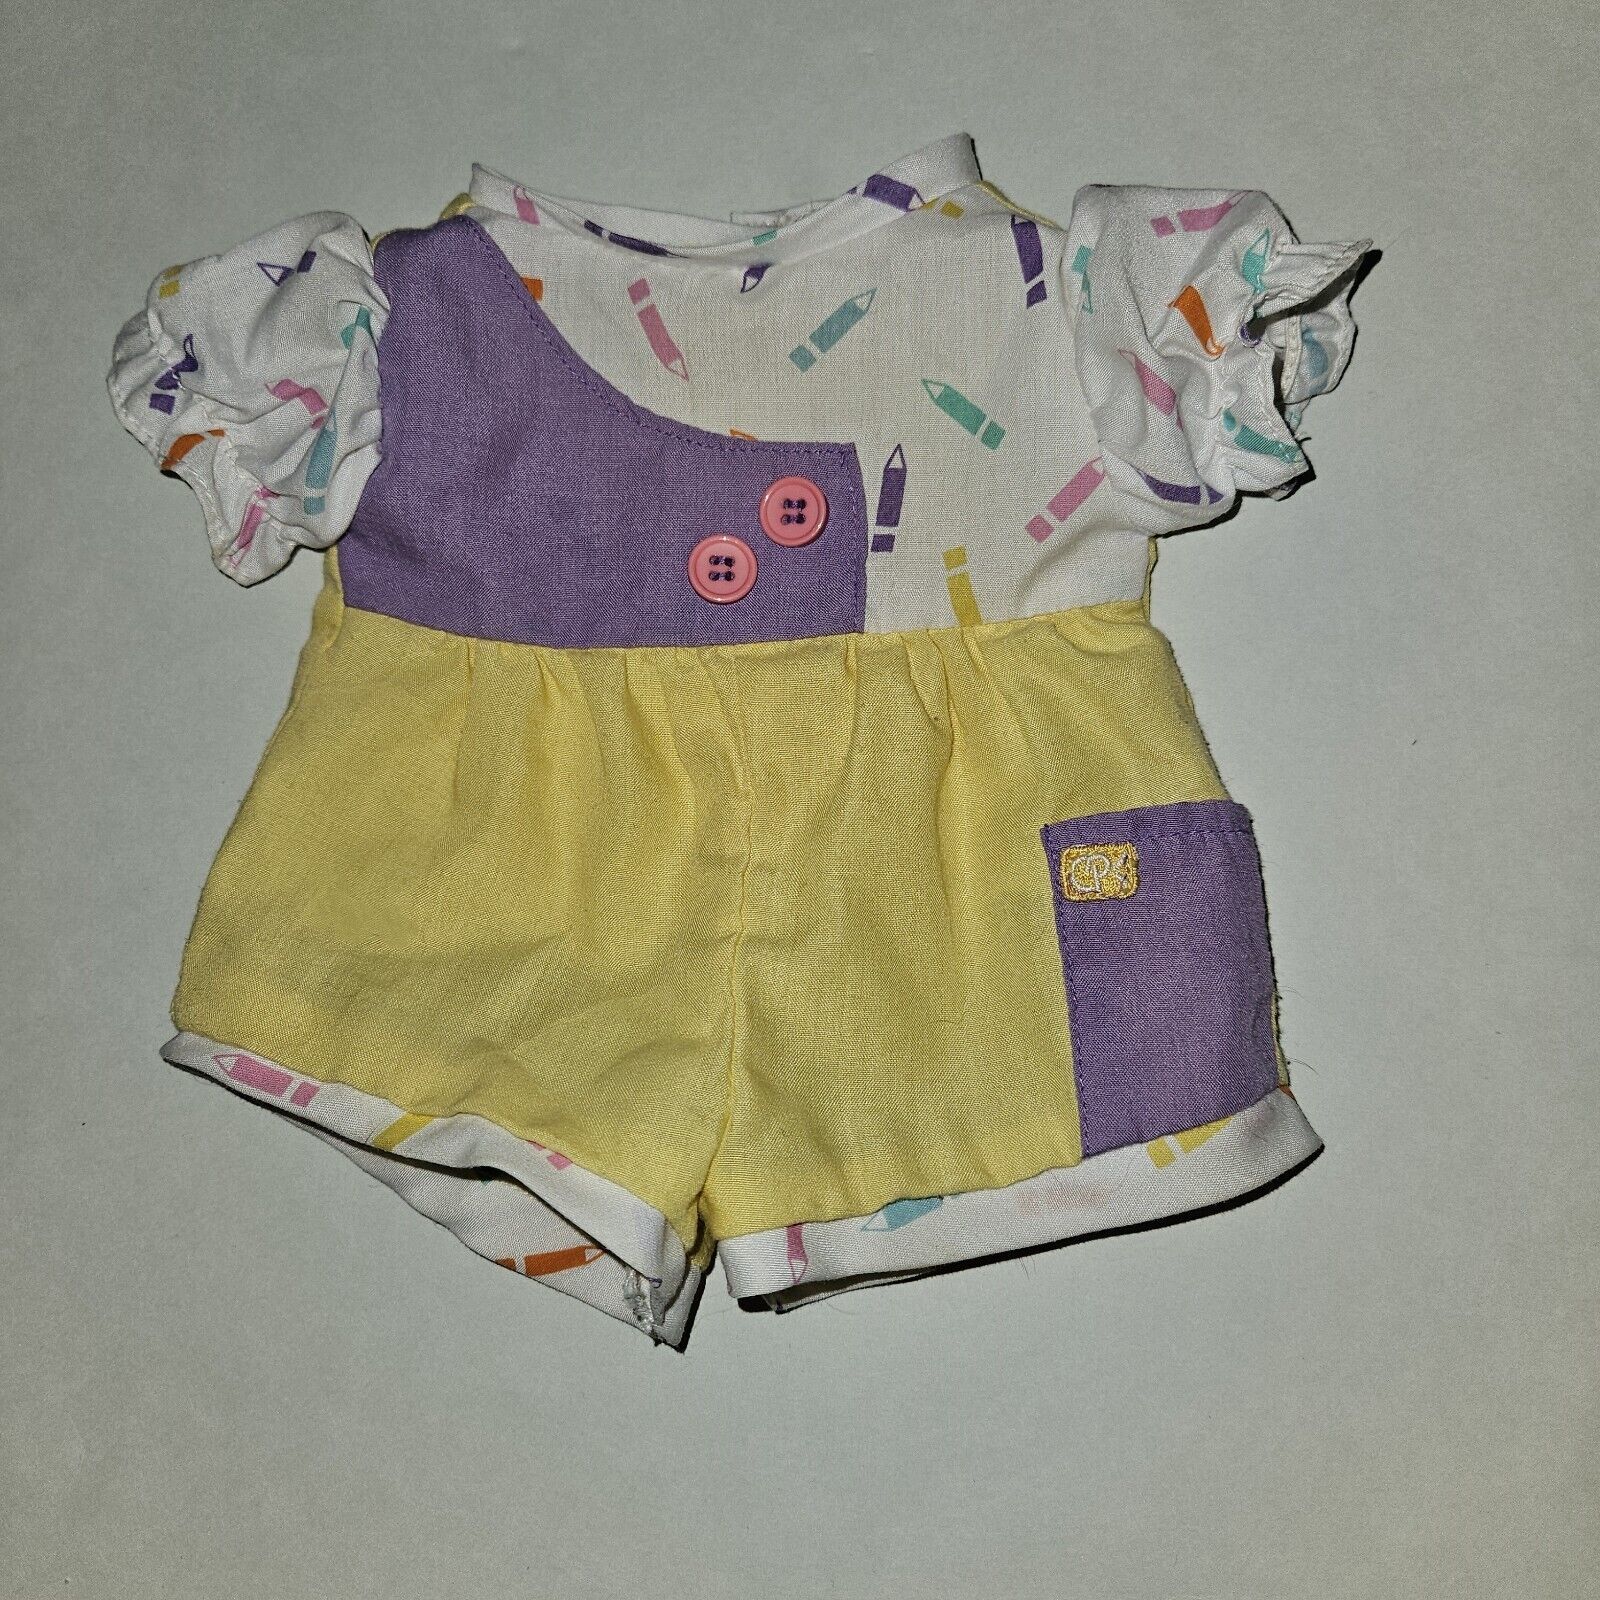 VTG Cabbage Patch Kids CPK Pencil Crayon Outfit Doll Clothes Yellow Purple 1989 - $39.55